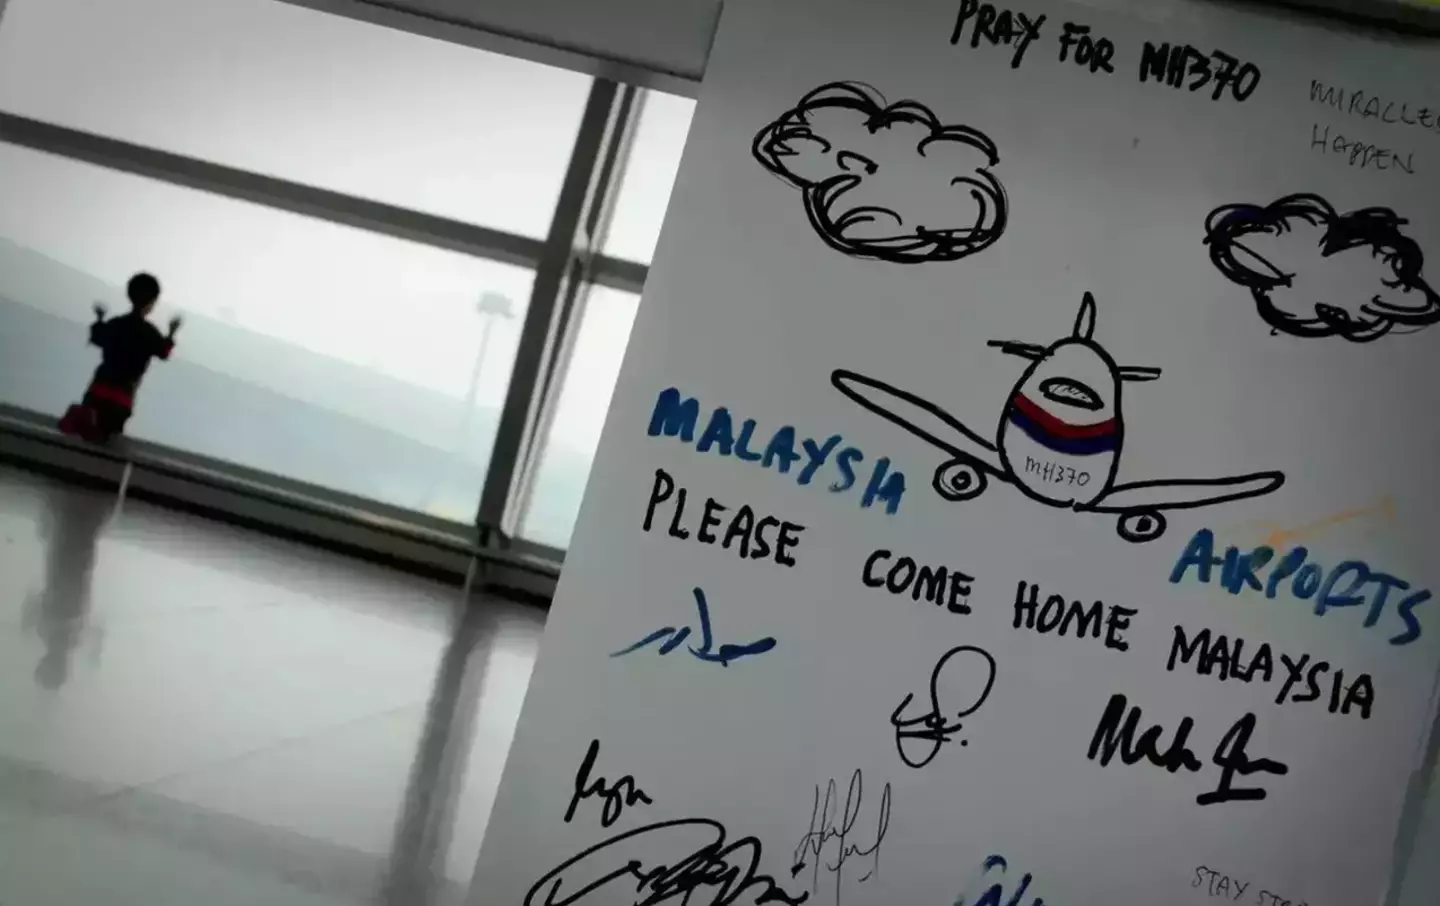 Flight MH370 went missing in 2014.